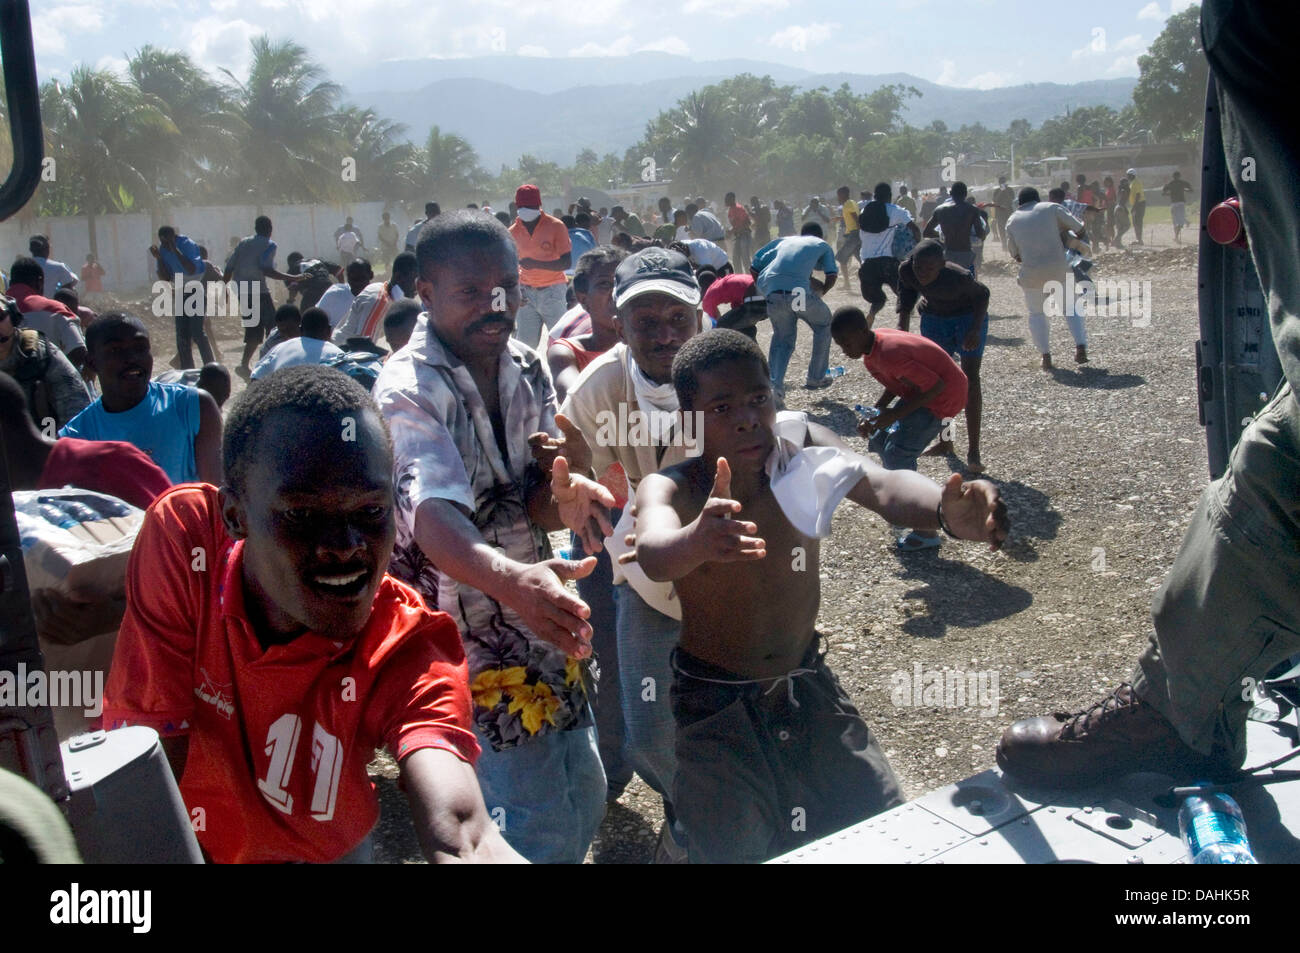 Haitians jostle for food rations as a US Navy helicopter unloads aid in the aftermath of the 7.0 magnitude earthquake that killed 220,000 people January 16, 2010 in Port-au-Prince, Haiti. Stock Photo